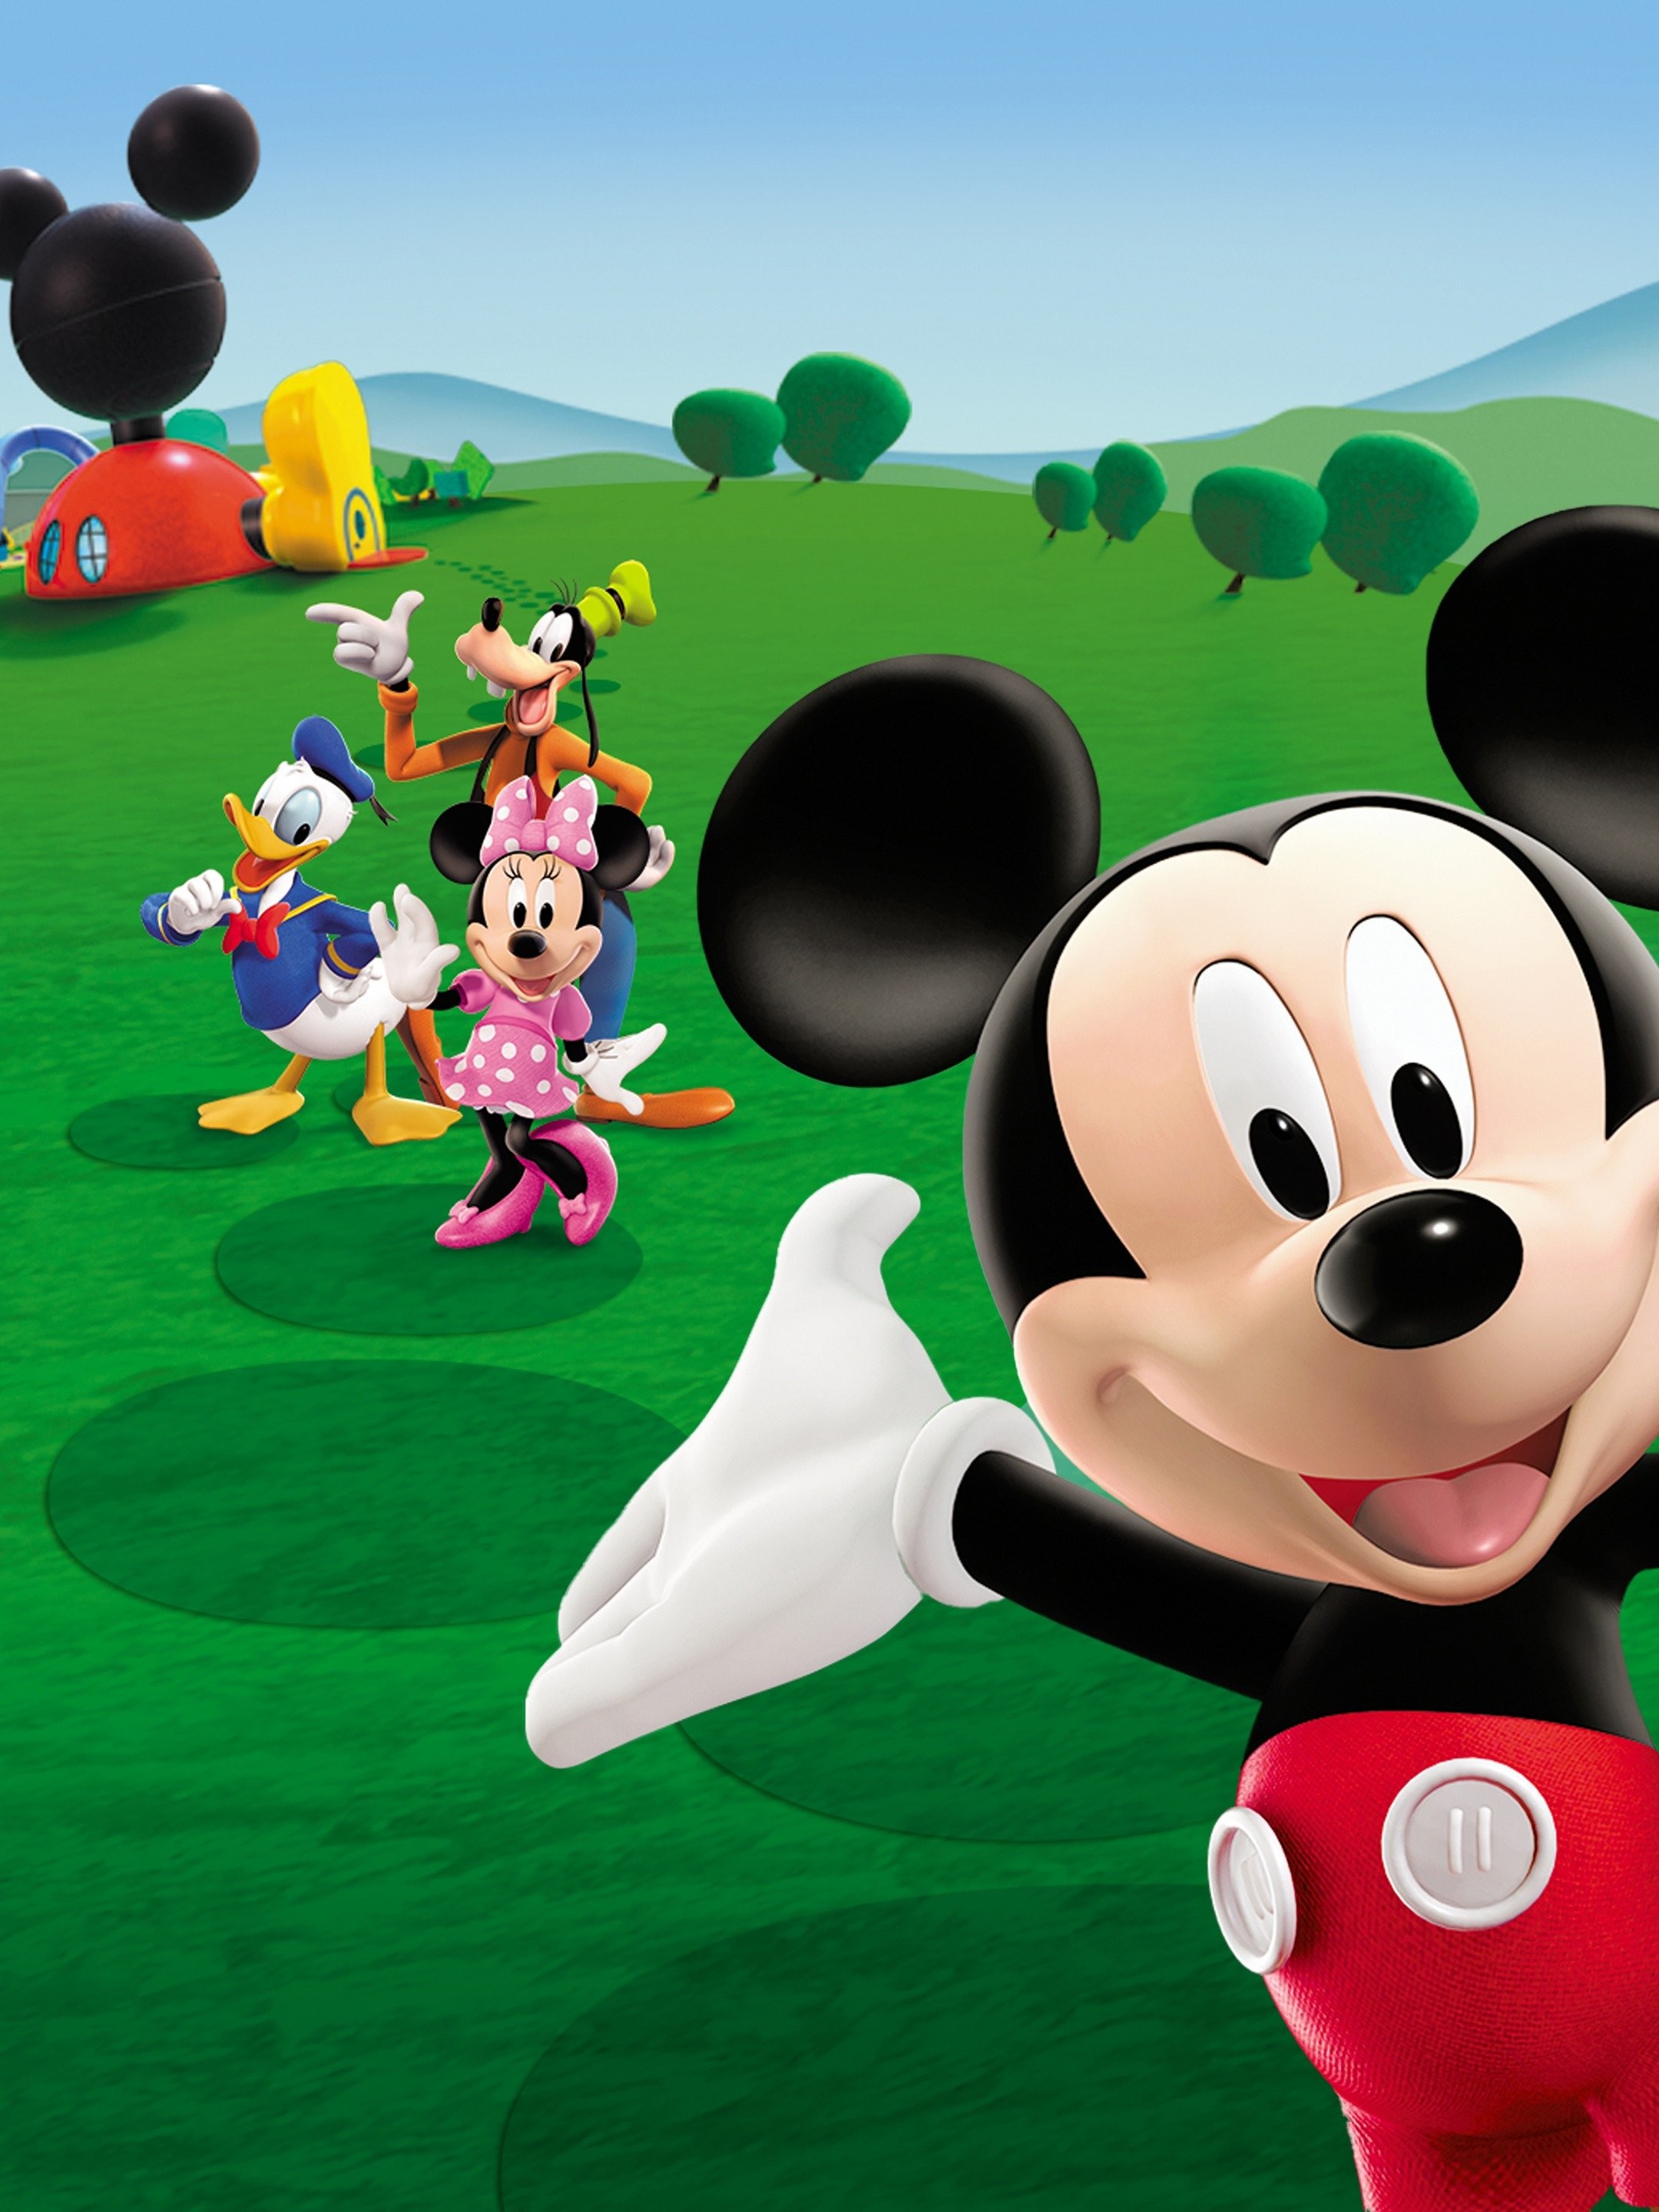 Mickey and Minnie Mouse turn 91-years-old